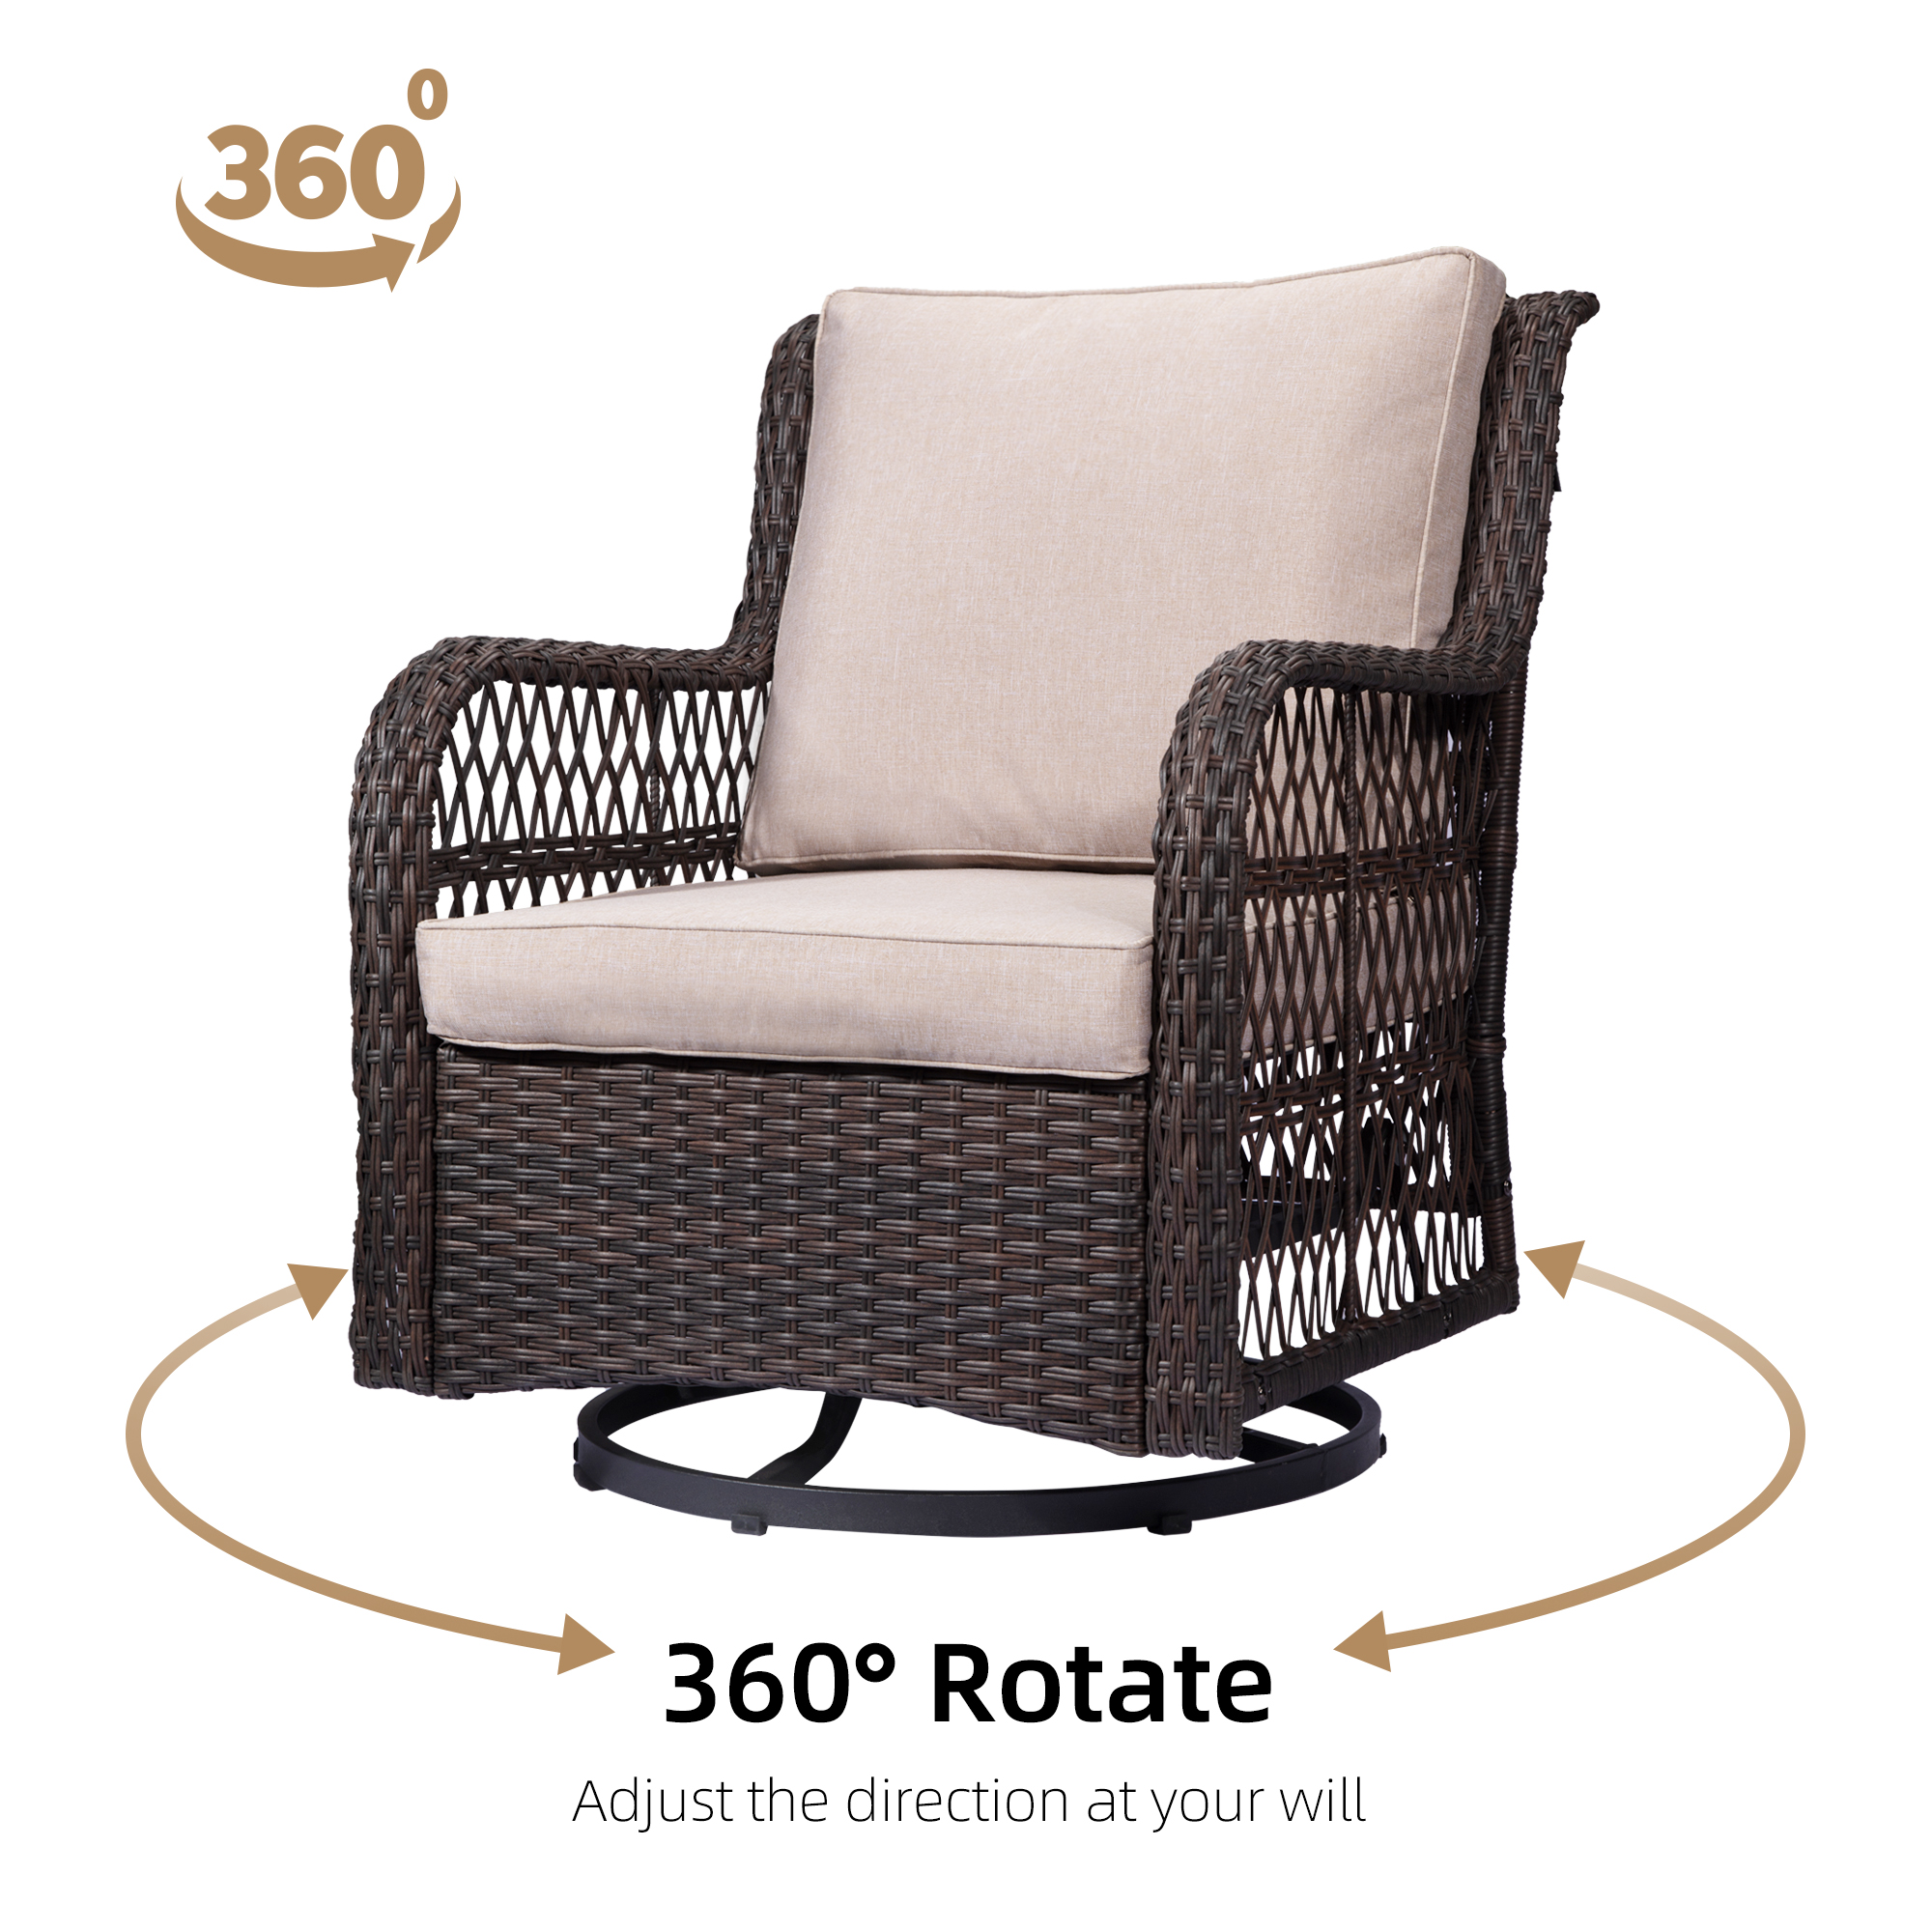 3 Pieces Outdoor Swivel Rocker Patio Chairs Set with Cushion,2PCS 360° Swivel Rocking Patio Chairs and 1PC Matching Side Table for Outside Backyard Garden Beige - image 3 of 7